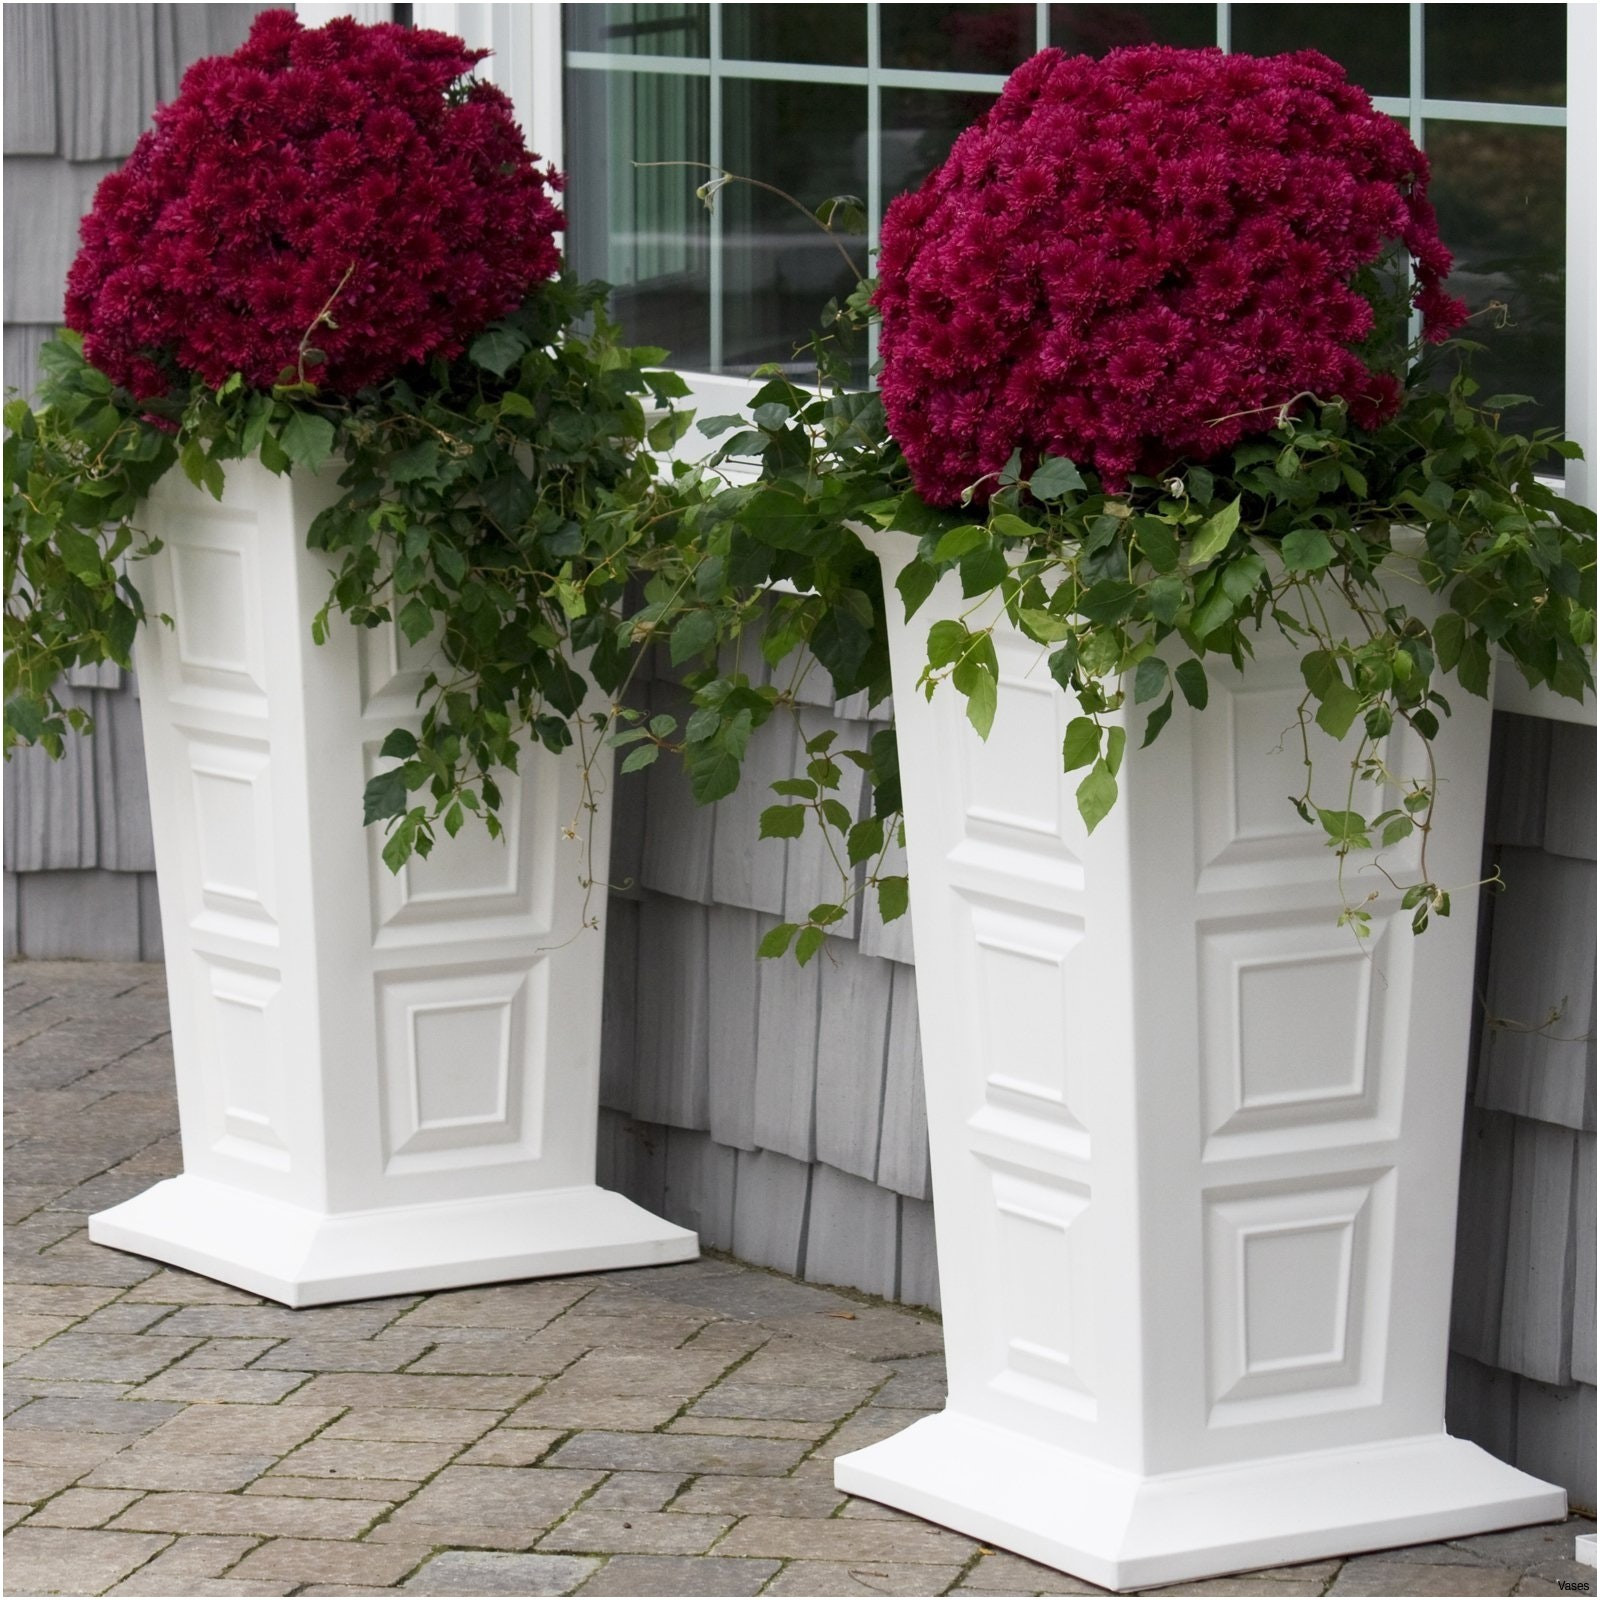 21 Lovable Extra Large Floor Vases 2024 free download extra large floor vases of garden planters diy fresh diy home decor vaseh vases decorative inside garden planters diy best of indoor garden diy luxury home design diy planters new wall hangi